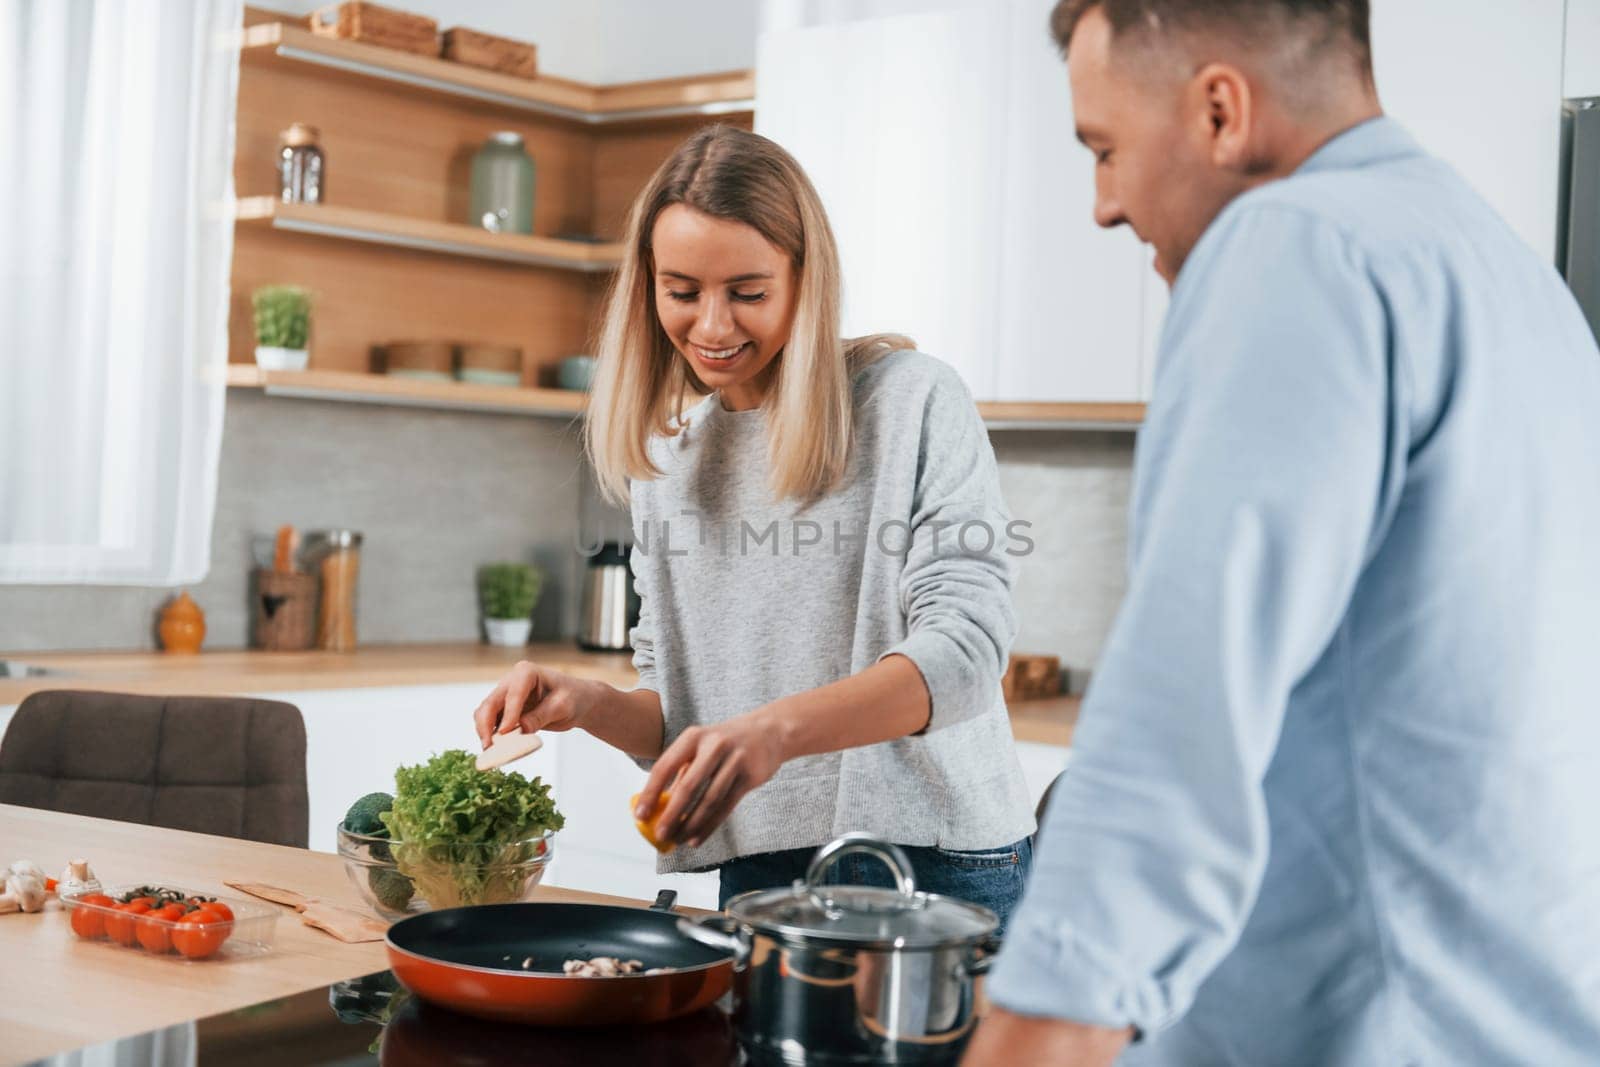 Delicious dinner. Couple preparing food at home on the modern kitchen.